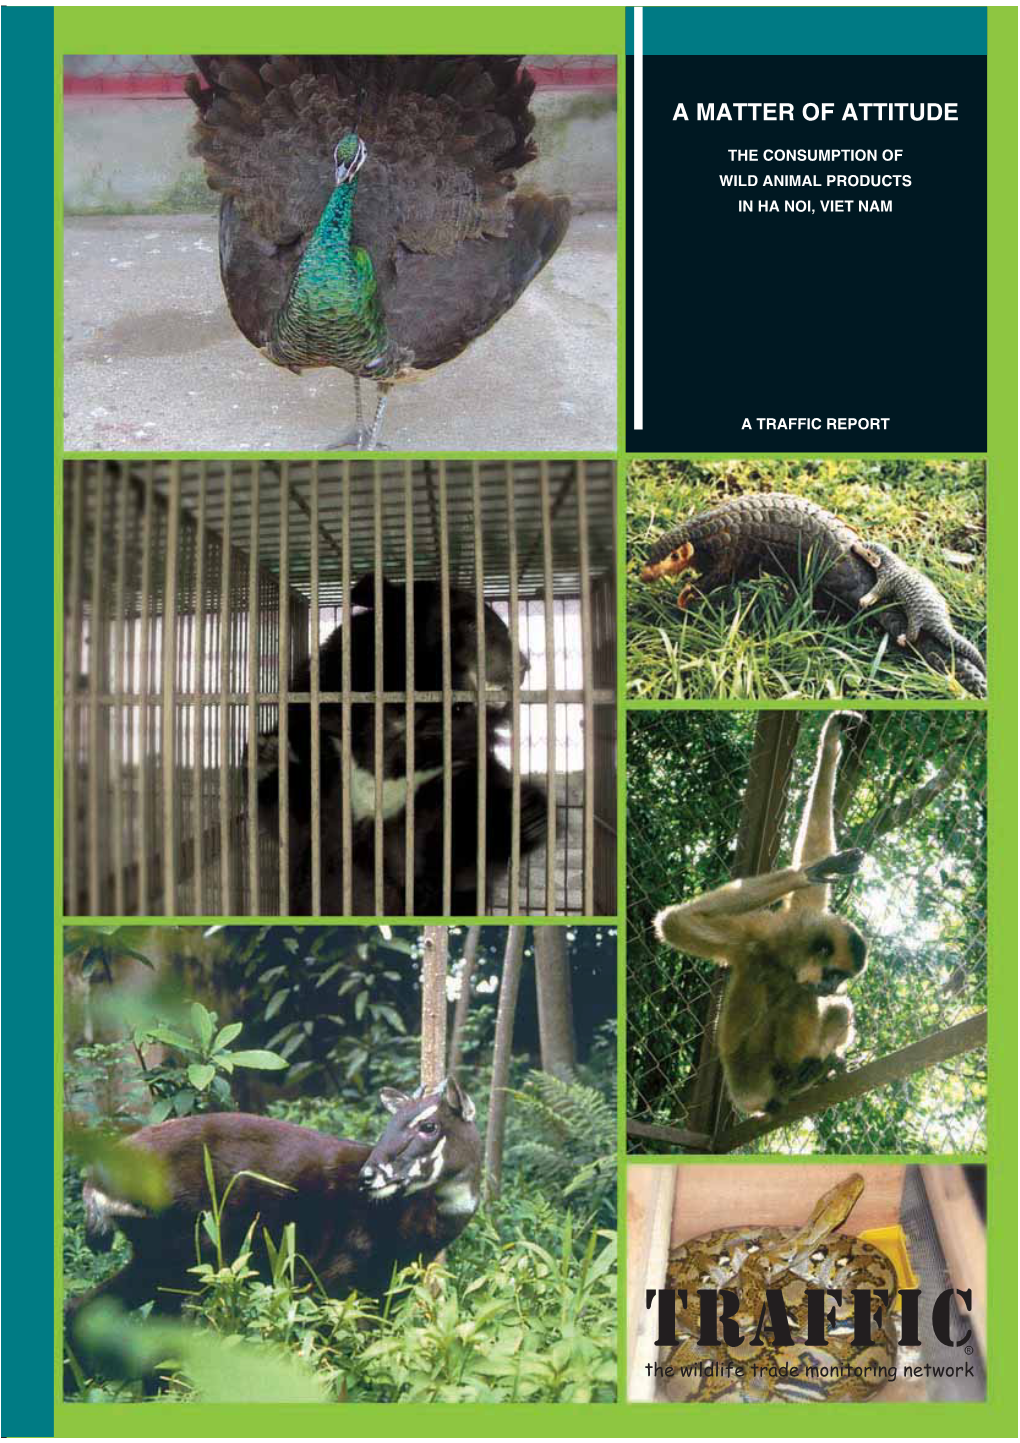 A Matter of Attitude: the Consumption of Wild Animal Products in Ha Noi, Viet Nam